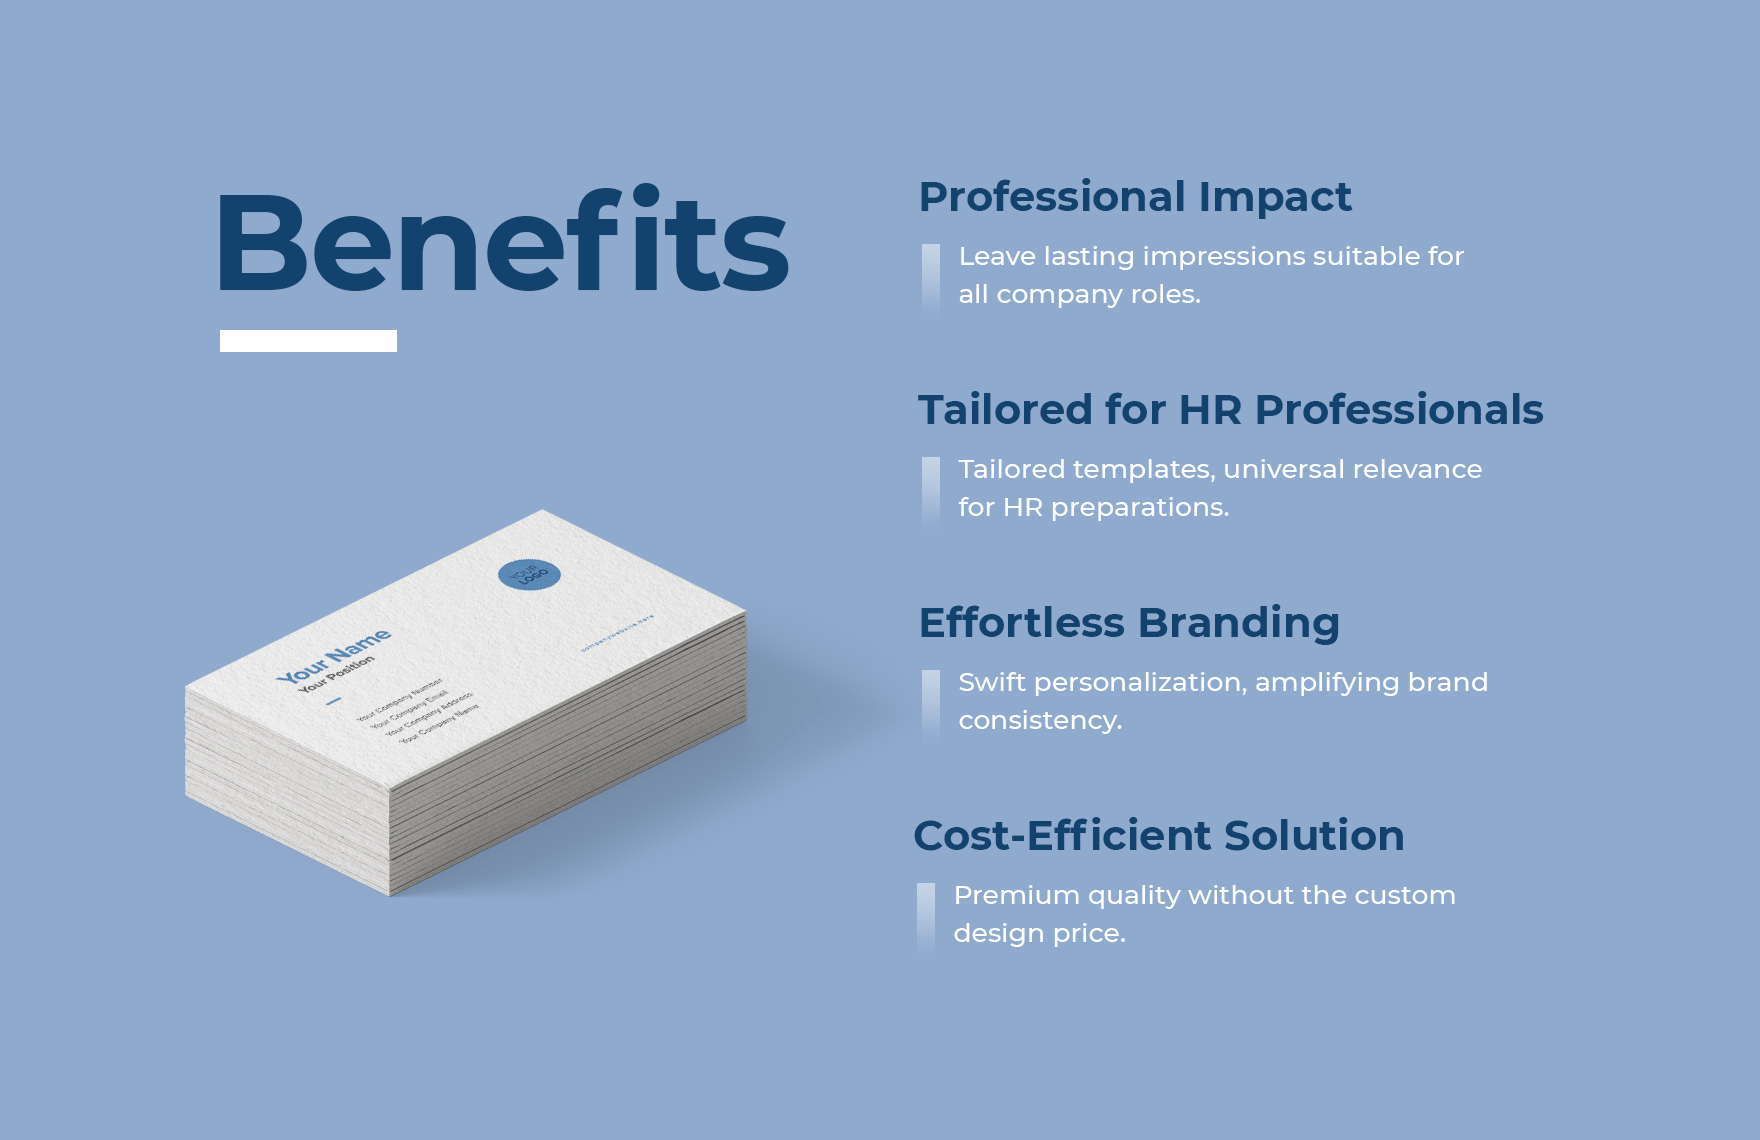 Accountant Business Card Template